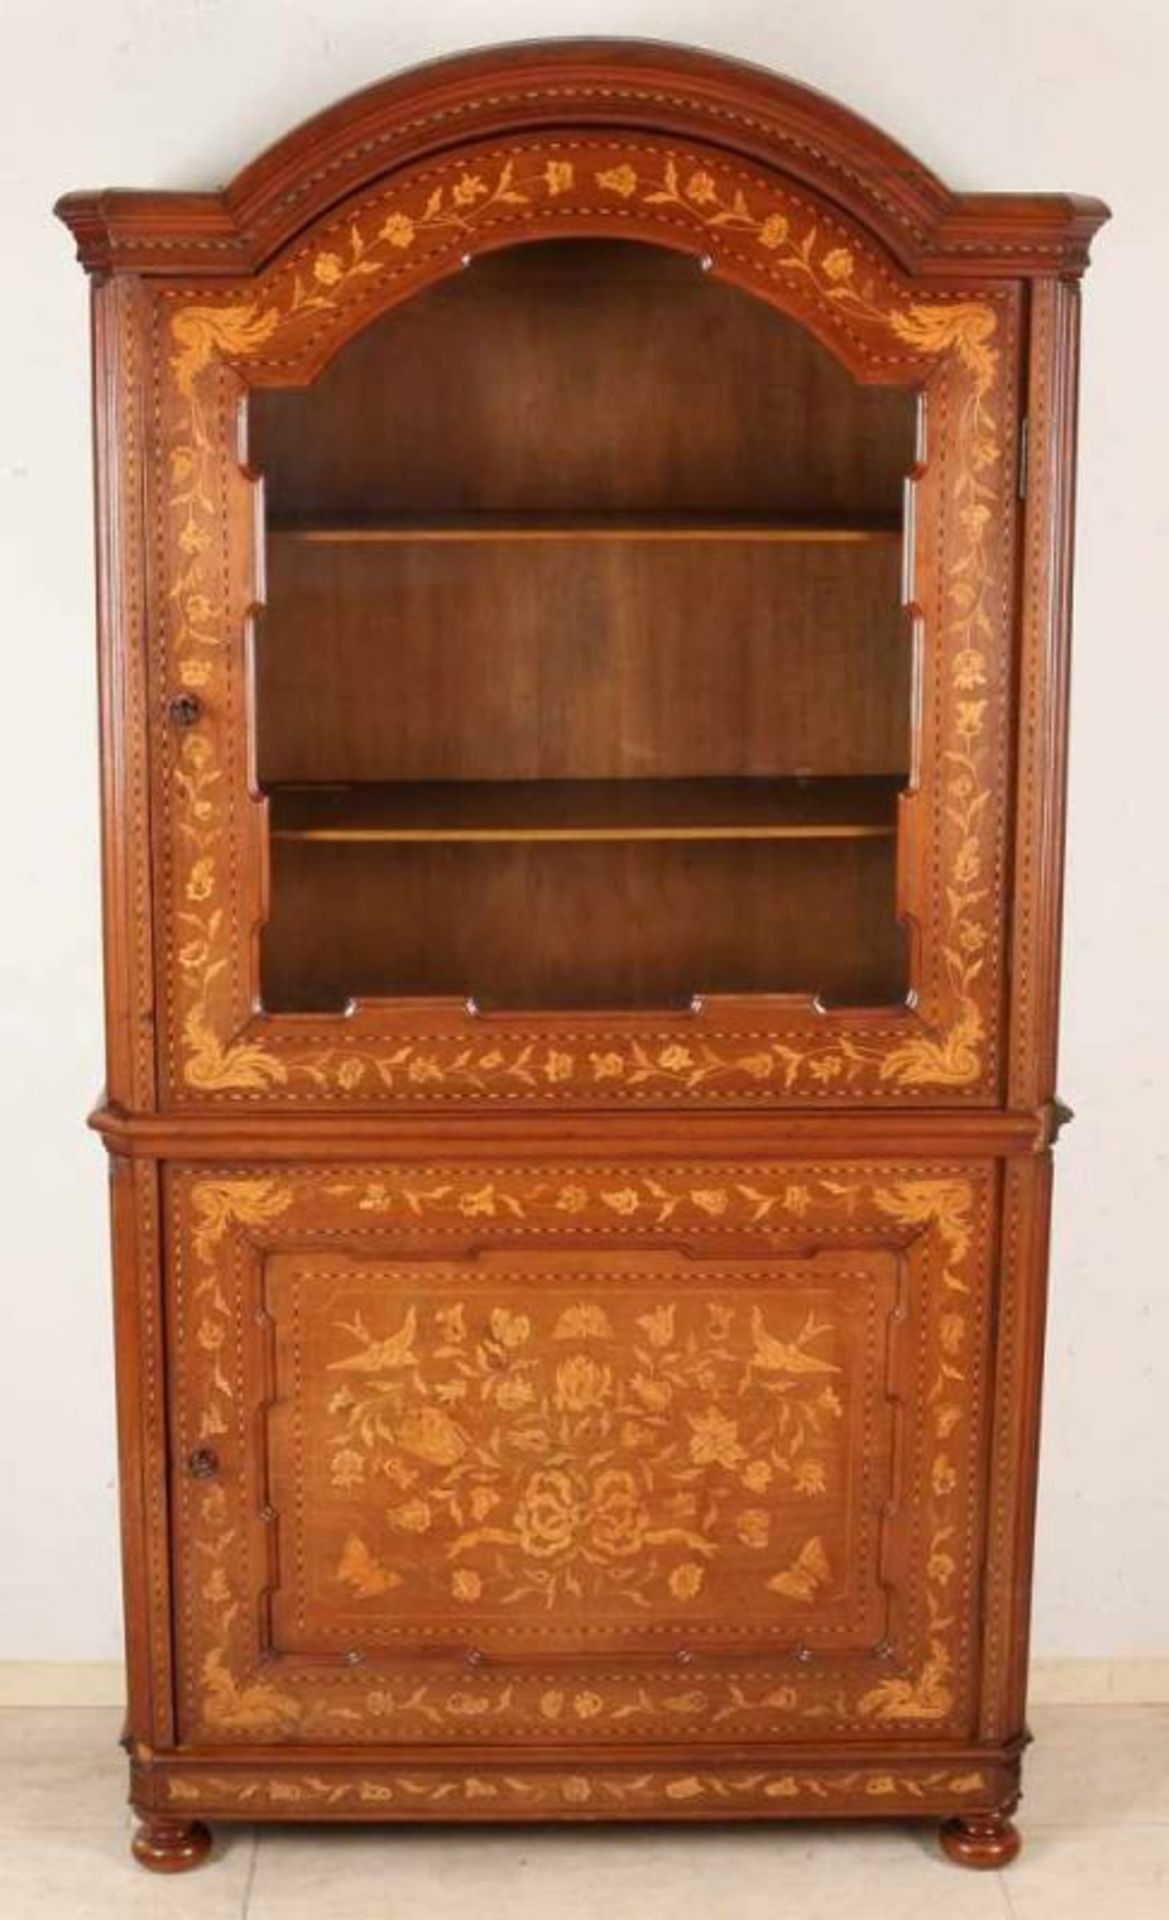 19th century Dutch double door walnut display cabinet with floral intarsia and birds. Also on sides.